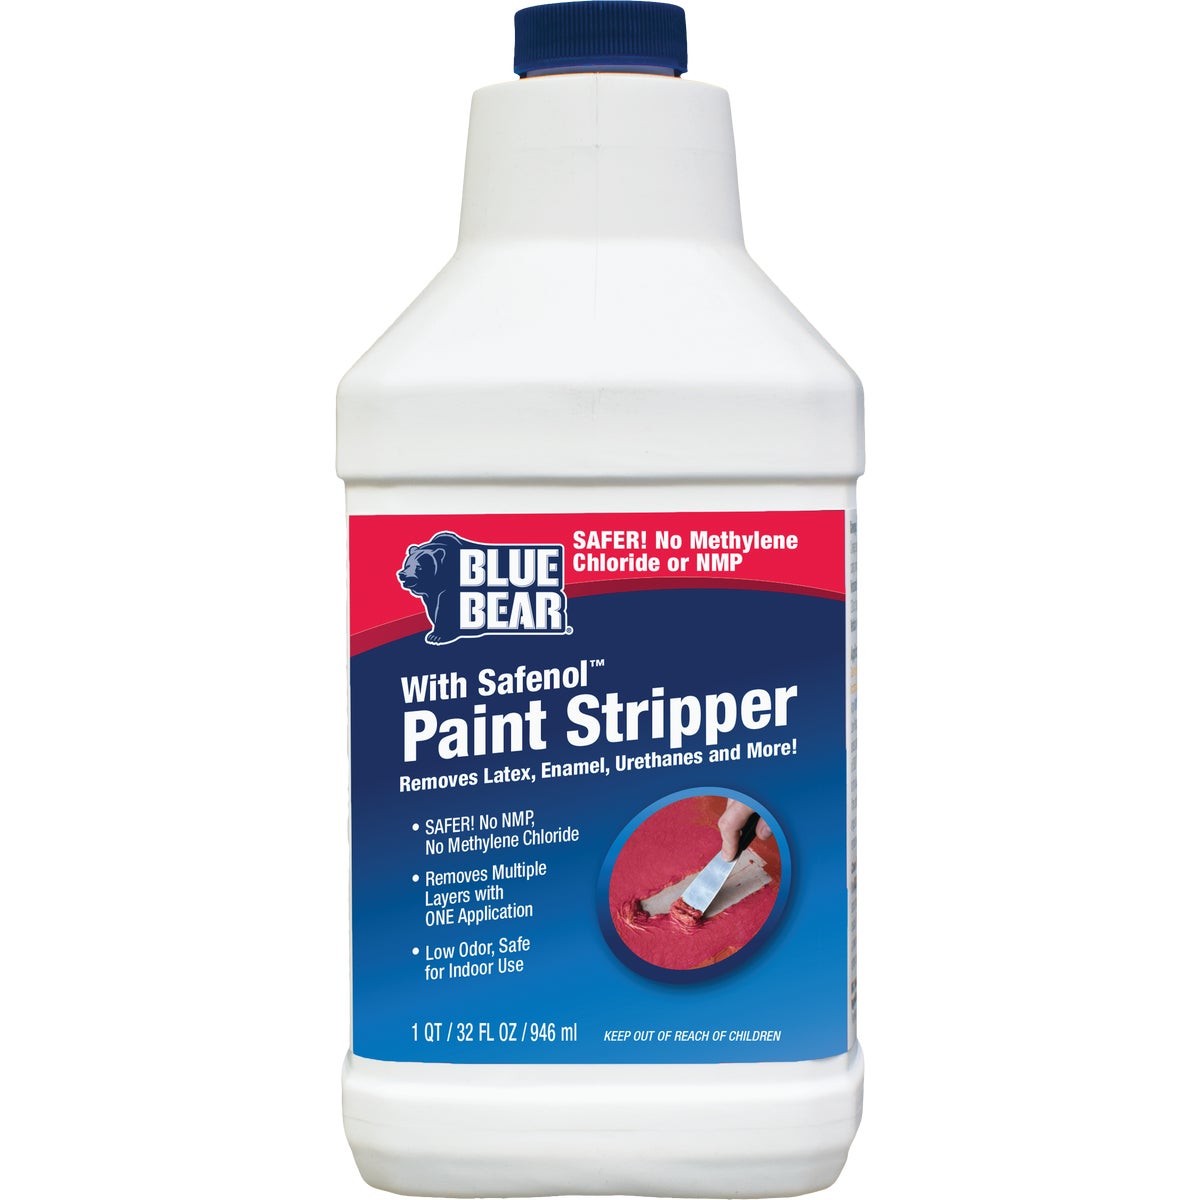 Item 789386, Blue Bear Paint Stripper with Safenol is an effective stripper without 